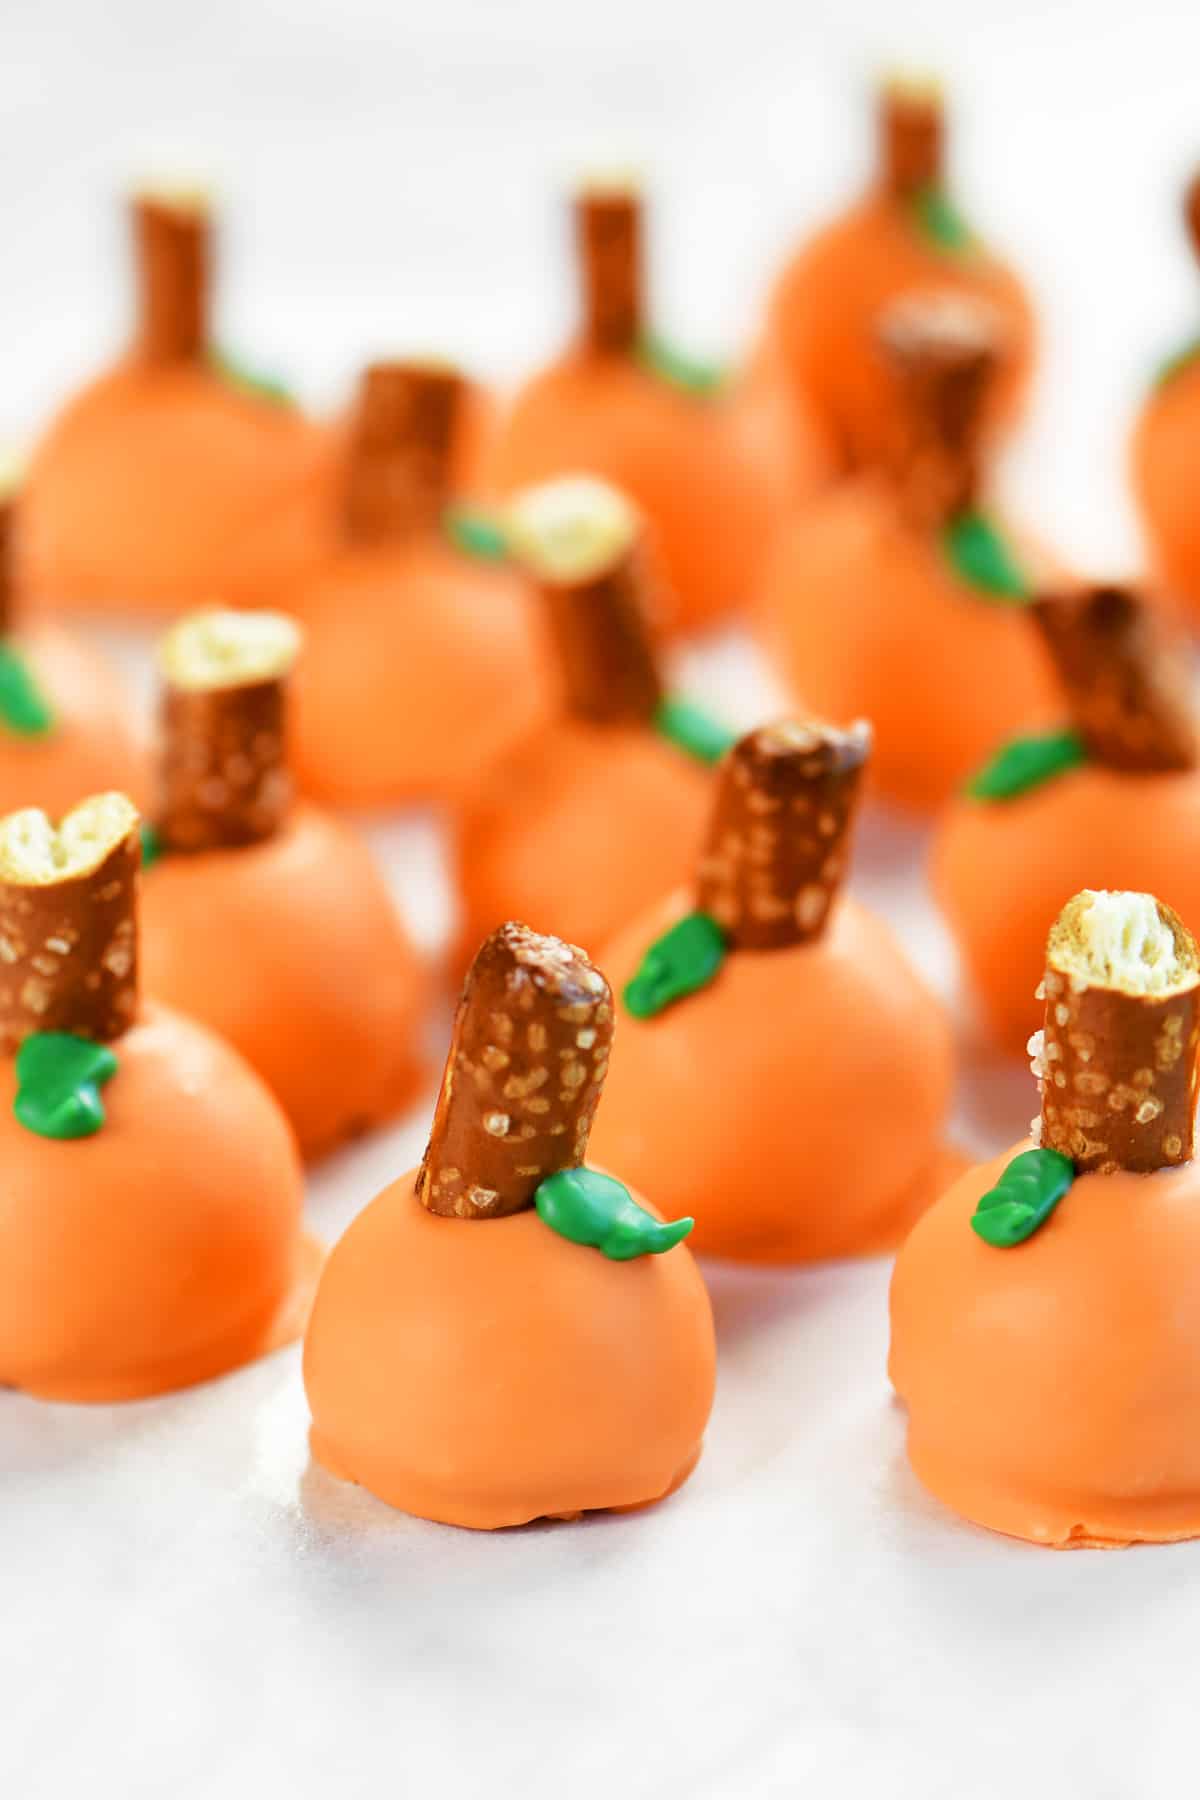 pumpkin oreo truffles with pretzel stems and green leaves.